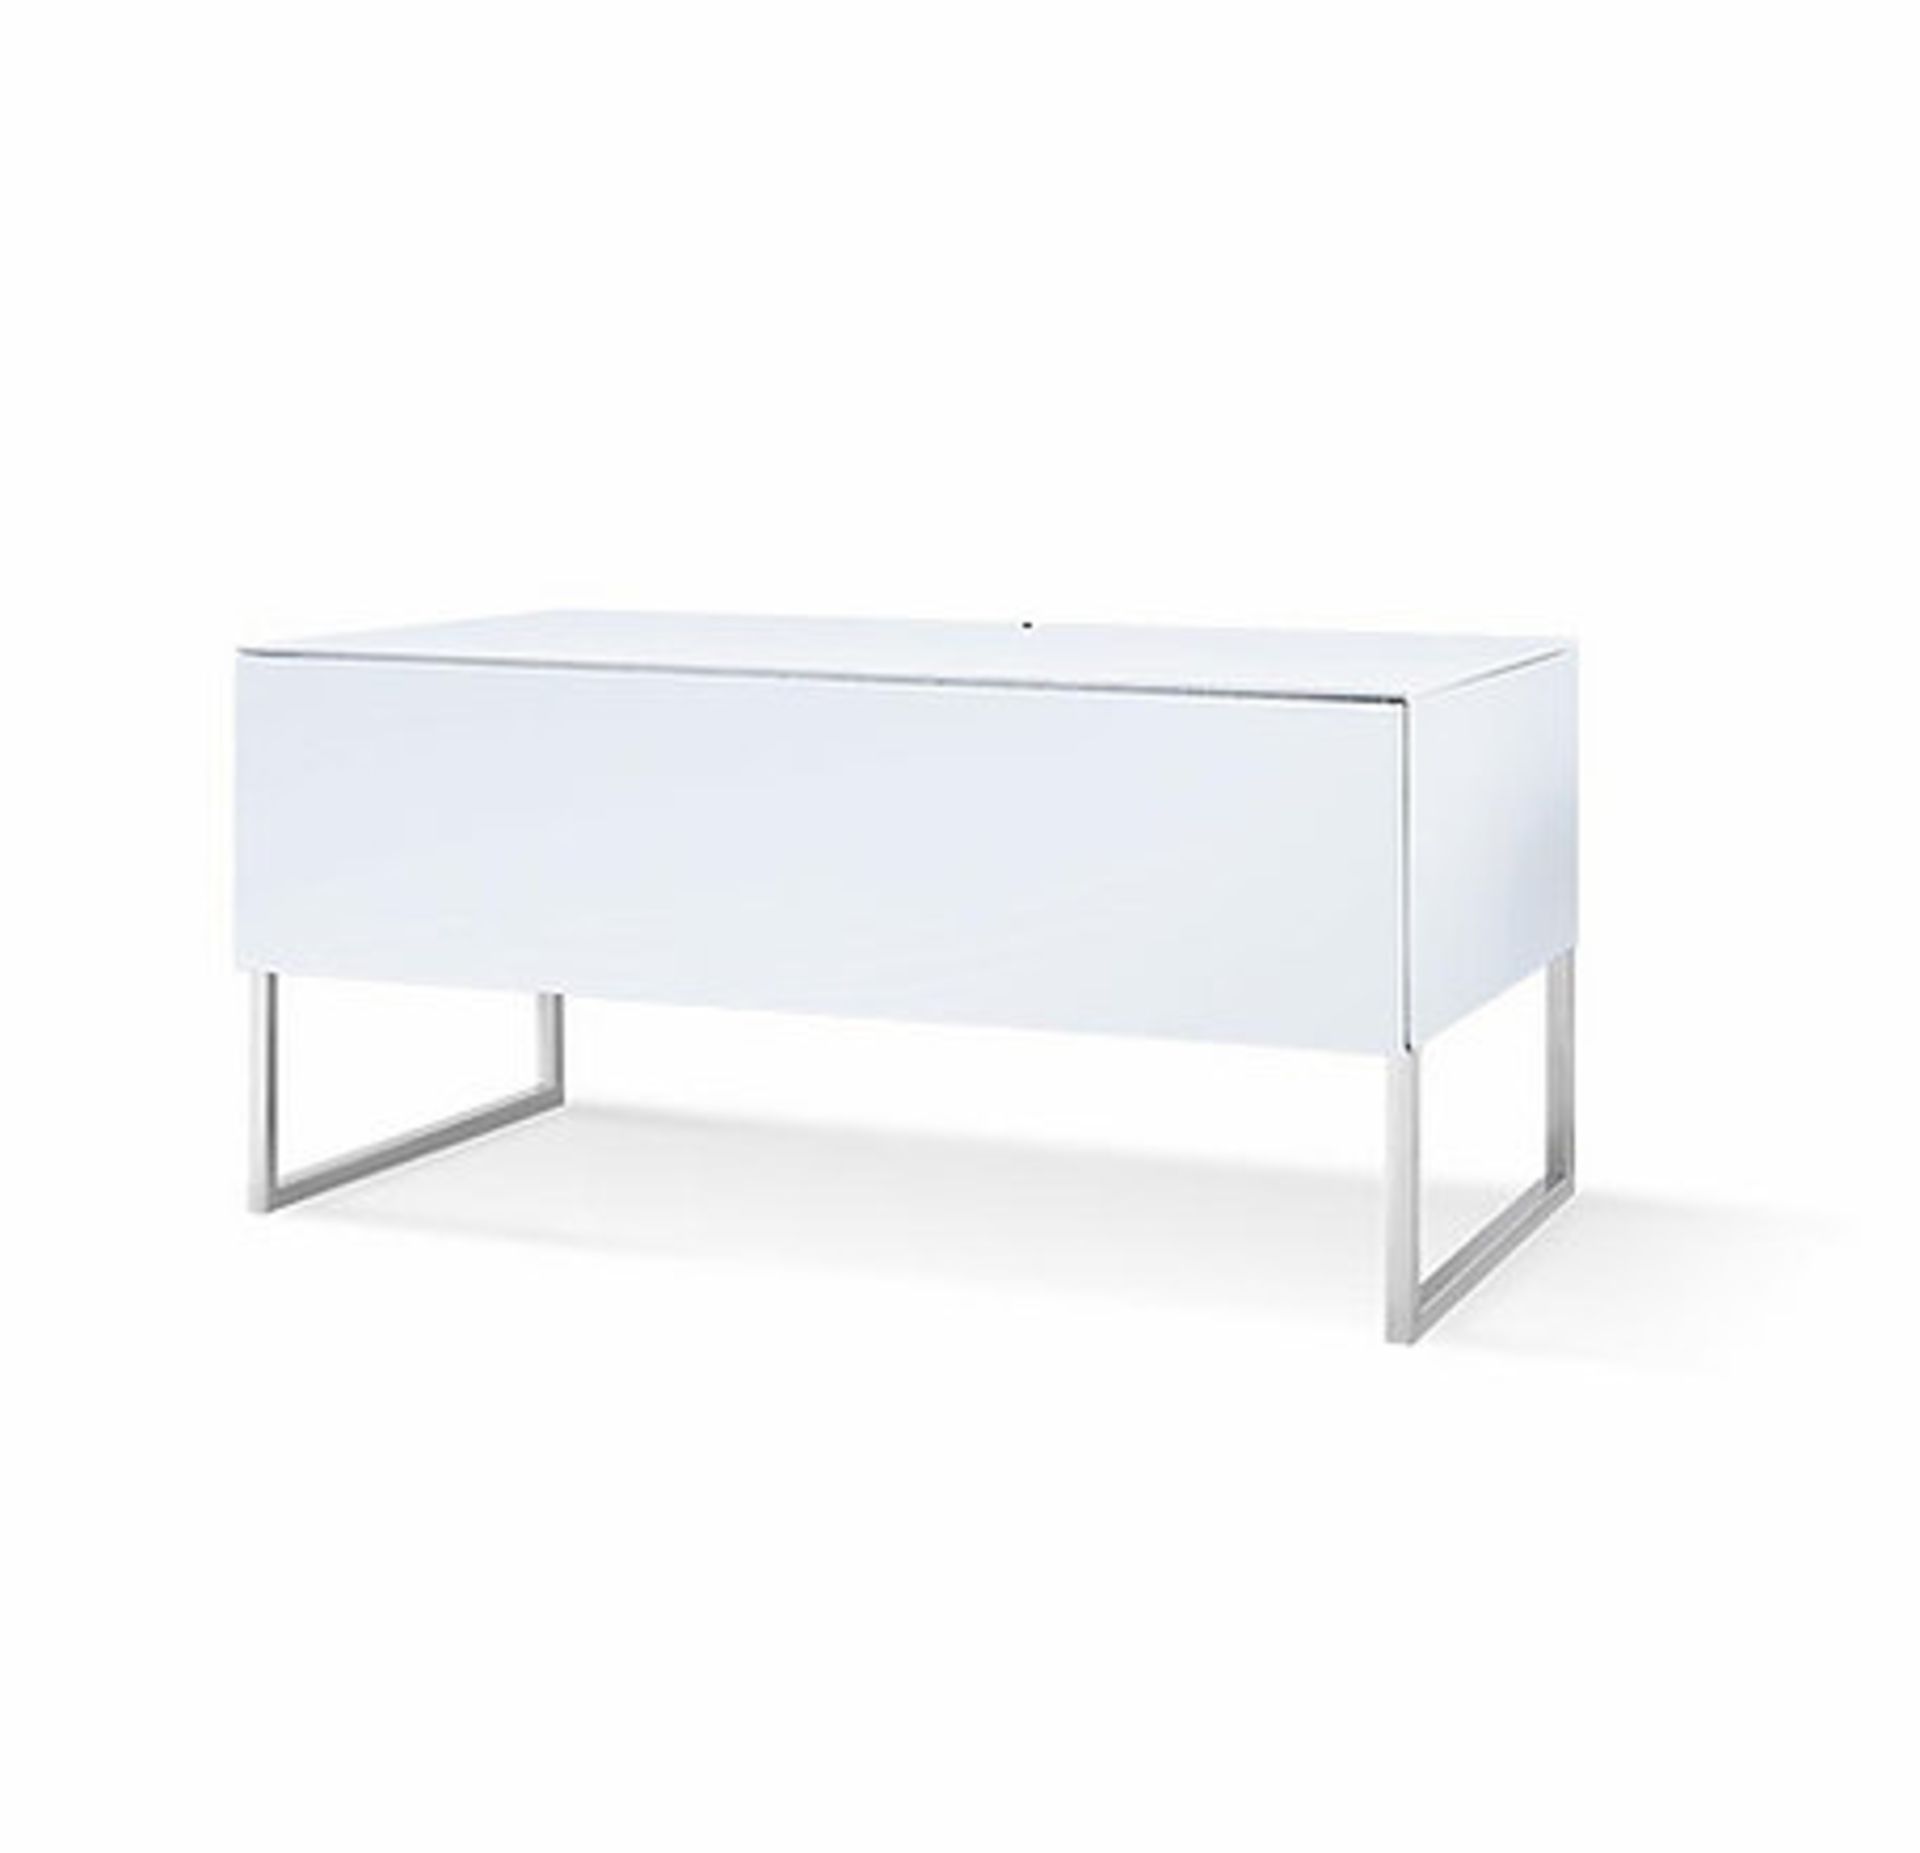 1 NORSTONE KHALM WHITE TV CABINET RRP Â£299 (GENERIC IMAGE GUIDE)